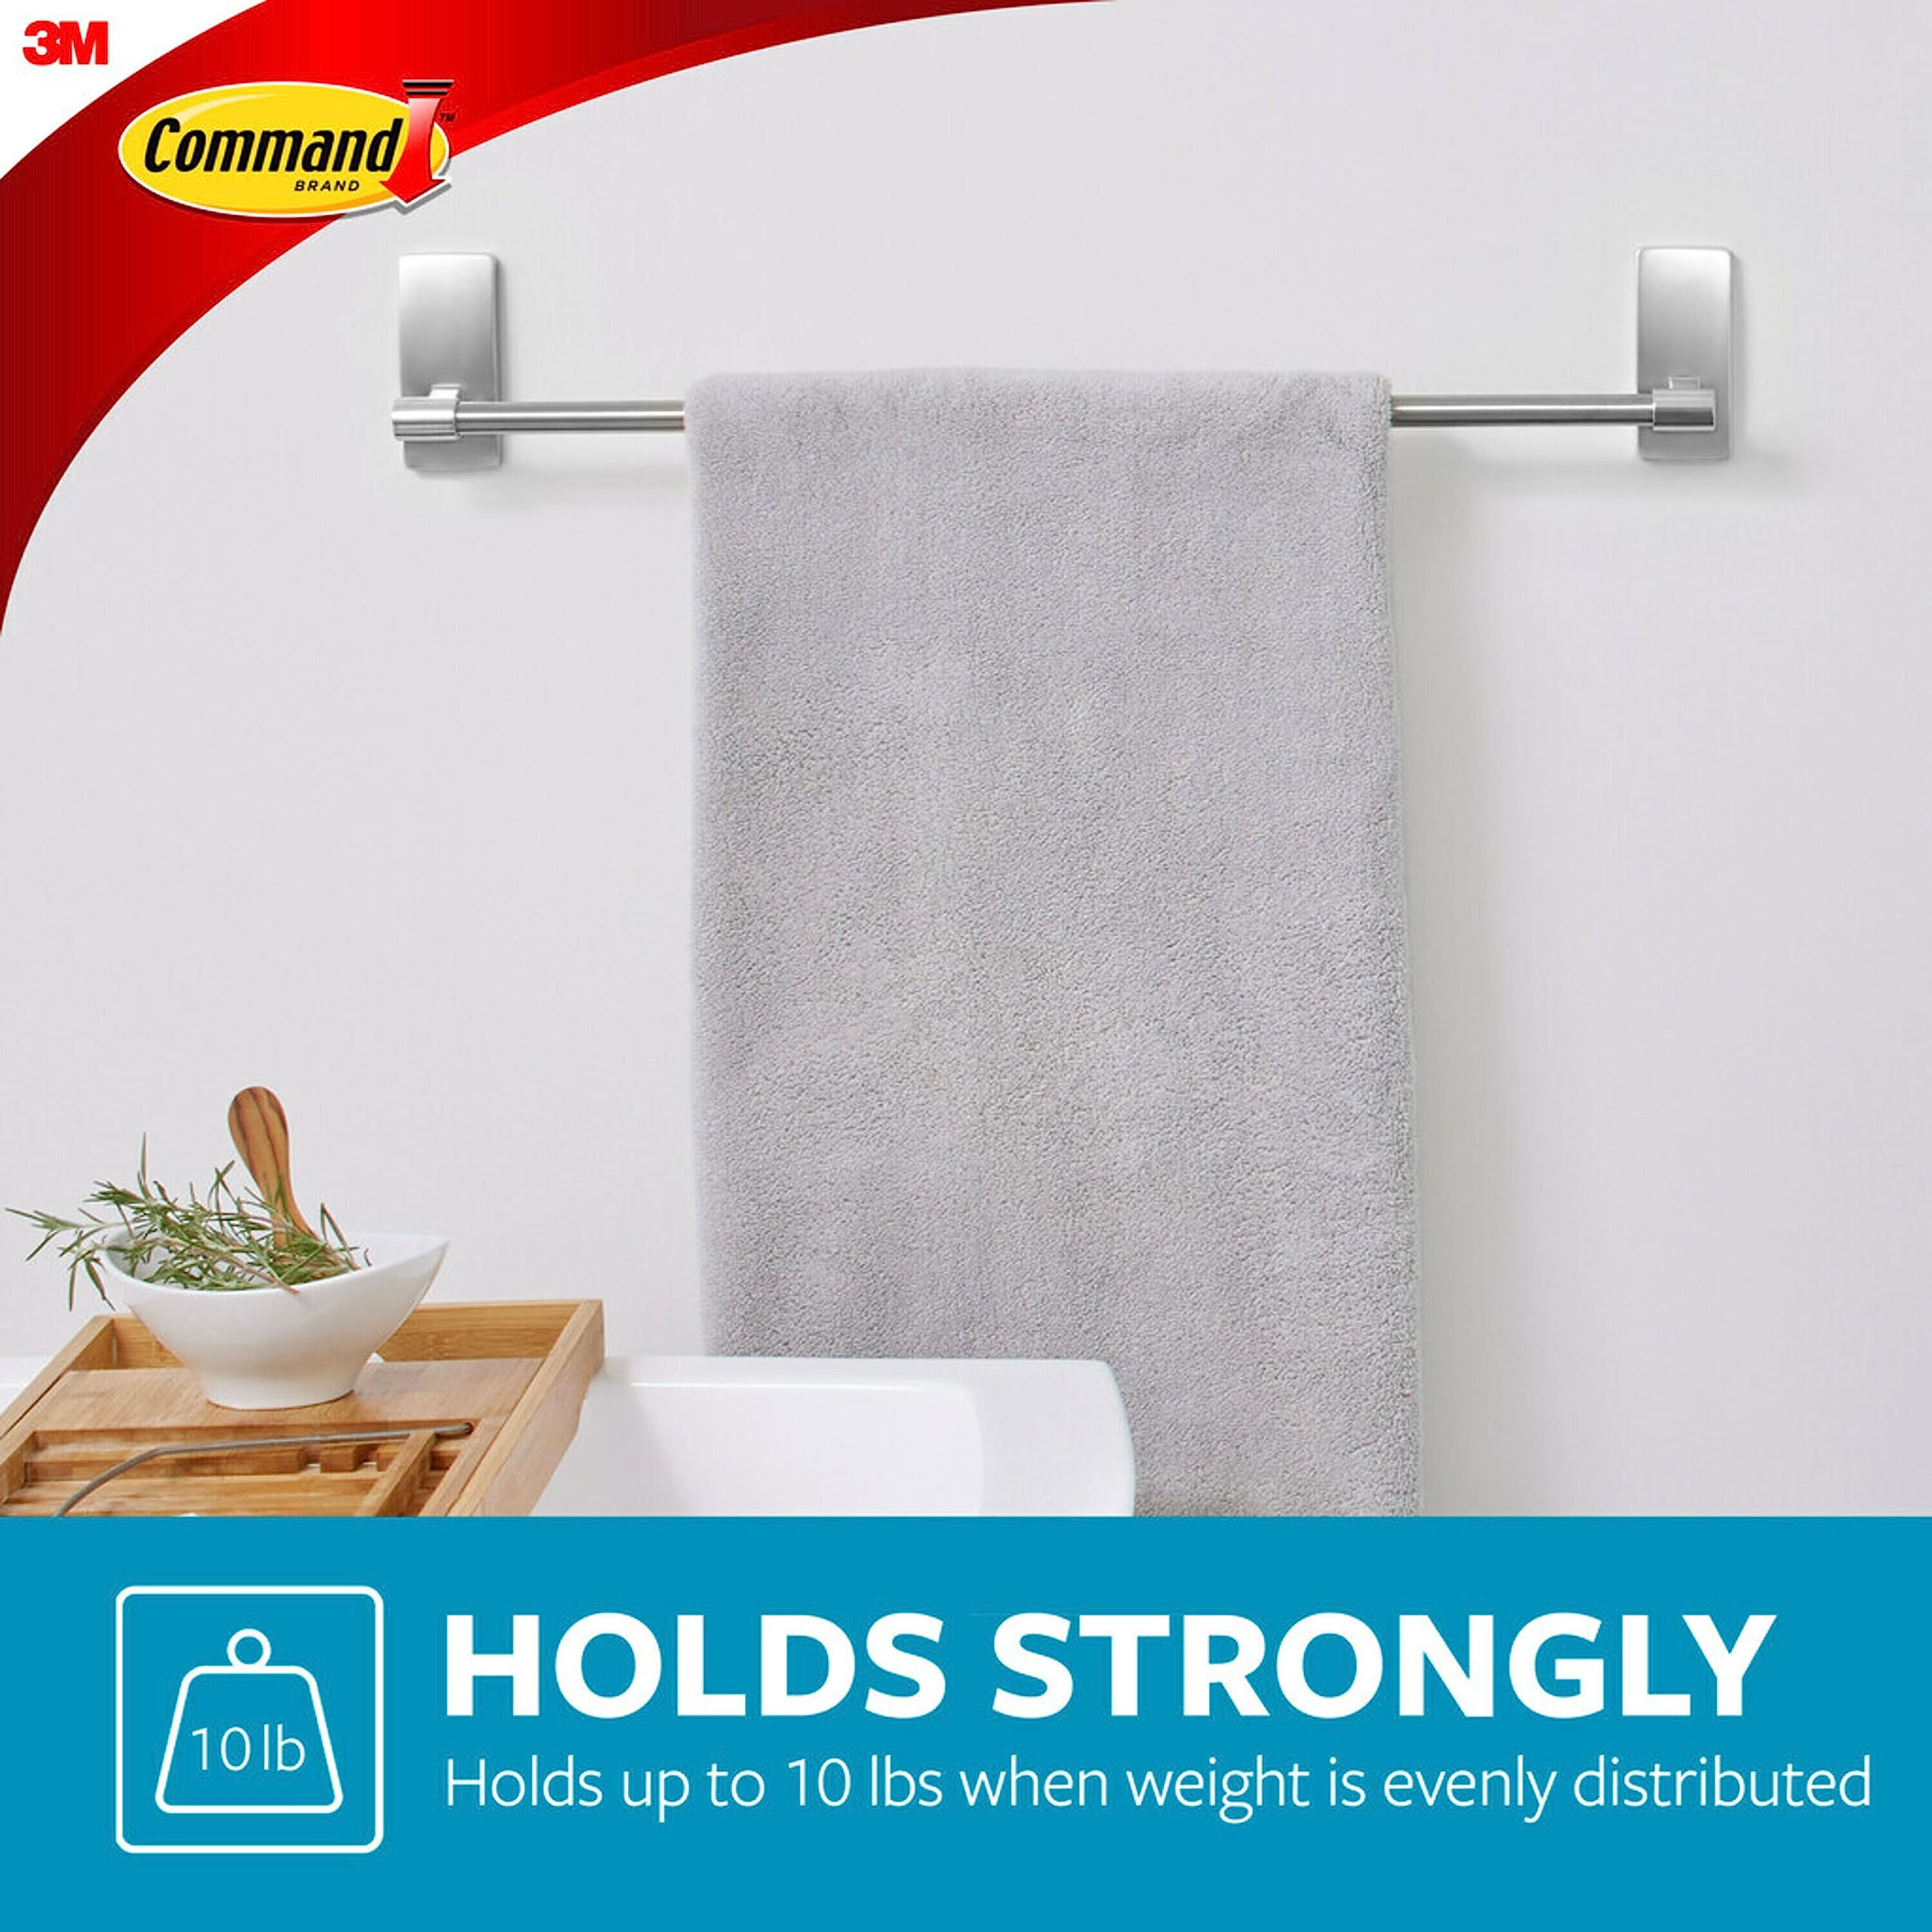 Command Bath Satin Nickel Towel Bar with Water Resistant Command Strips, Bathroom Organizer, 24 in Bar Length Holds up to 10 lbs